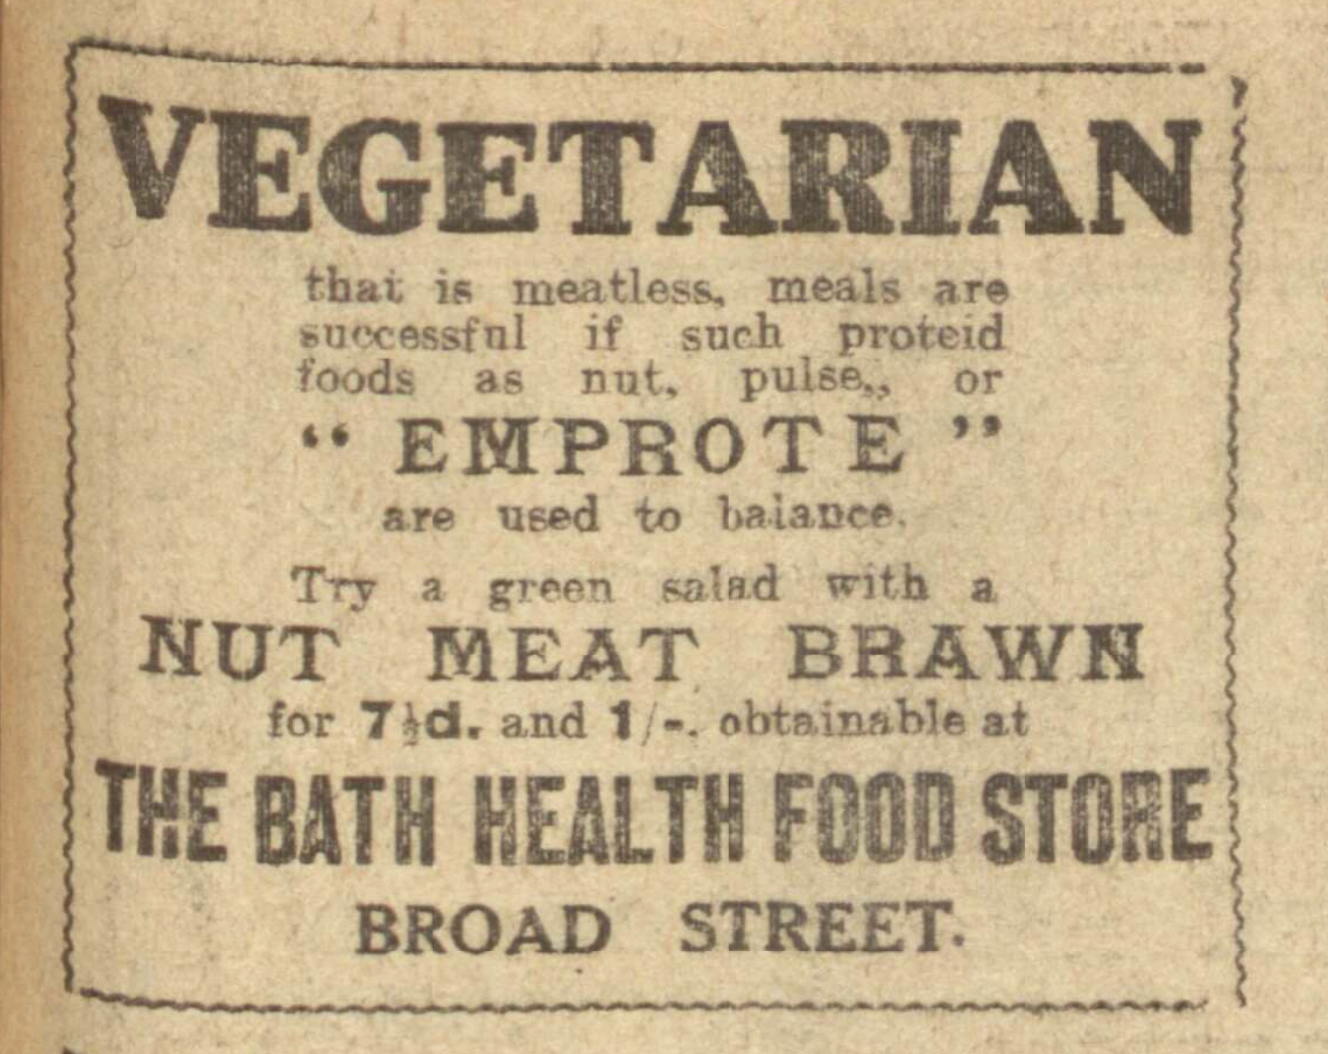 1916 advert for "Emprote" claiming: "Vegetarian that is meatless, meals are successful if such proteid foods as nut, pulses or "Emprote" are used to balance"